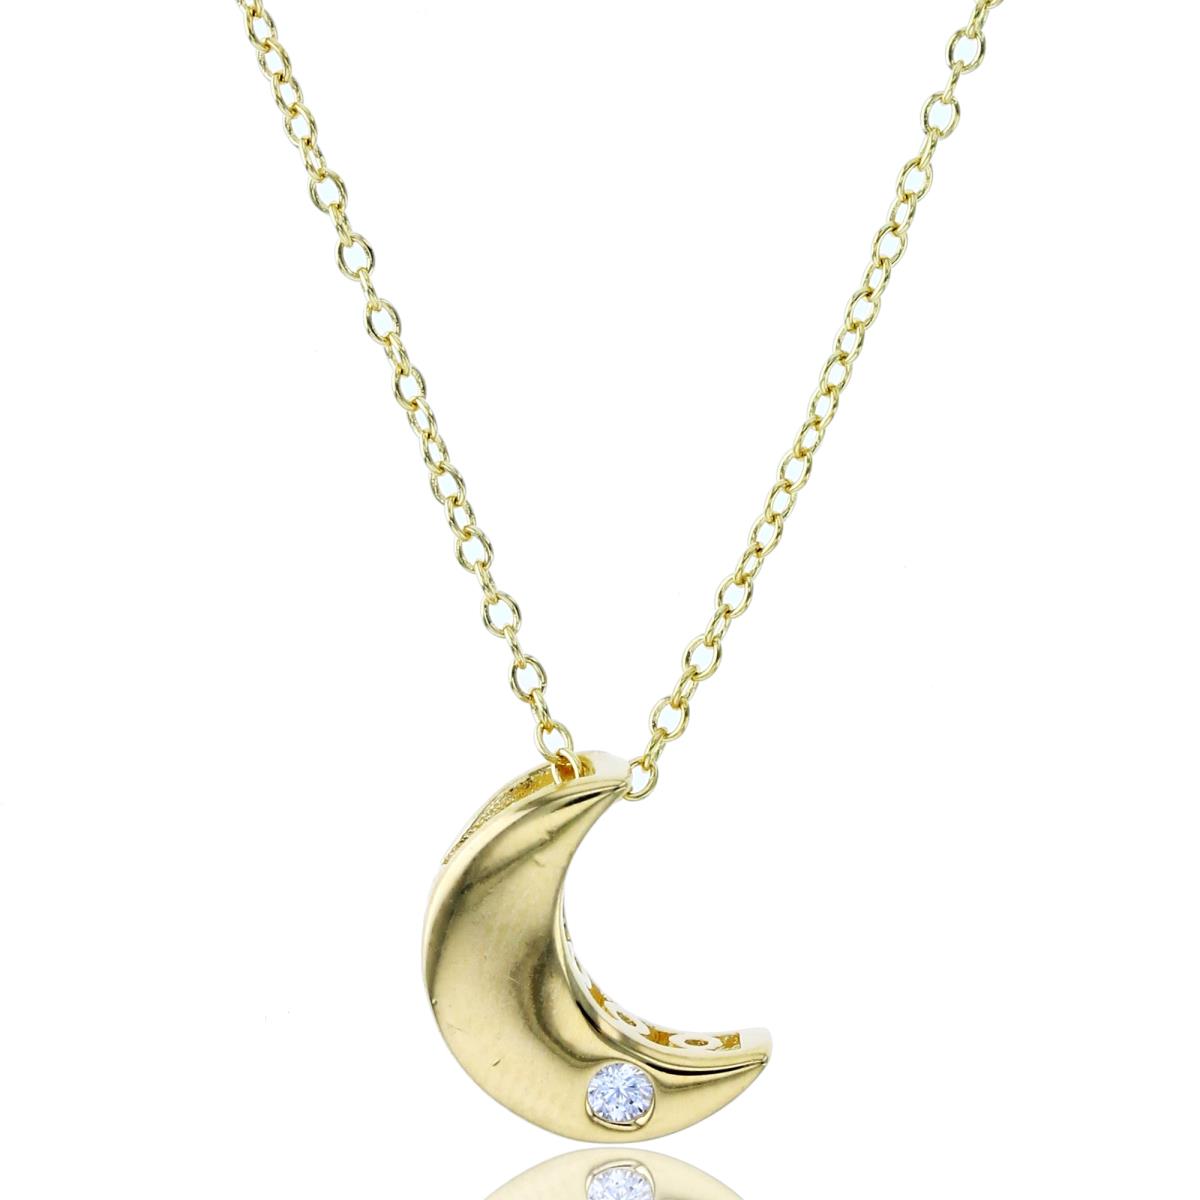 Sterling Silver+1Micron Yellow Gold Single Bezel 2mm Rnd CZ High Polish Moon 16+2"Necklace